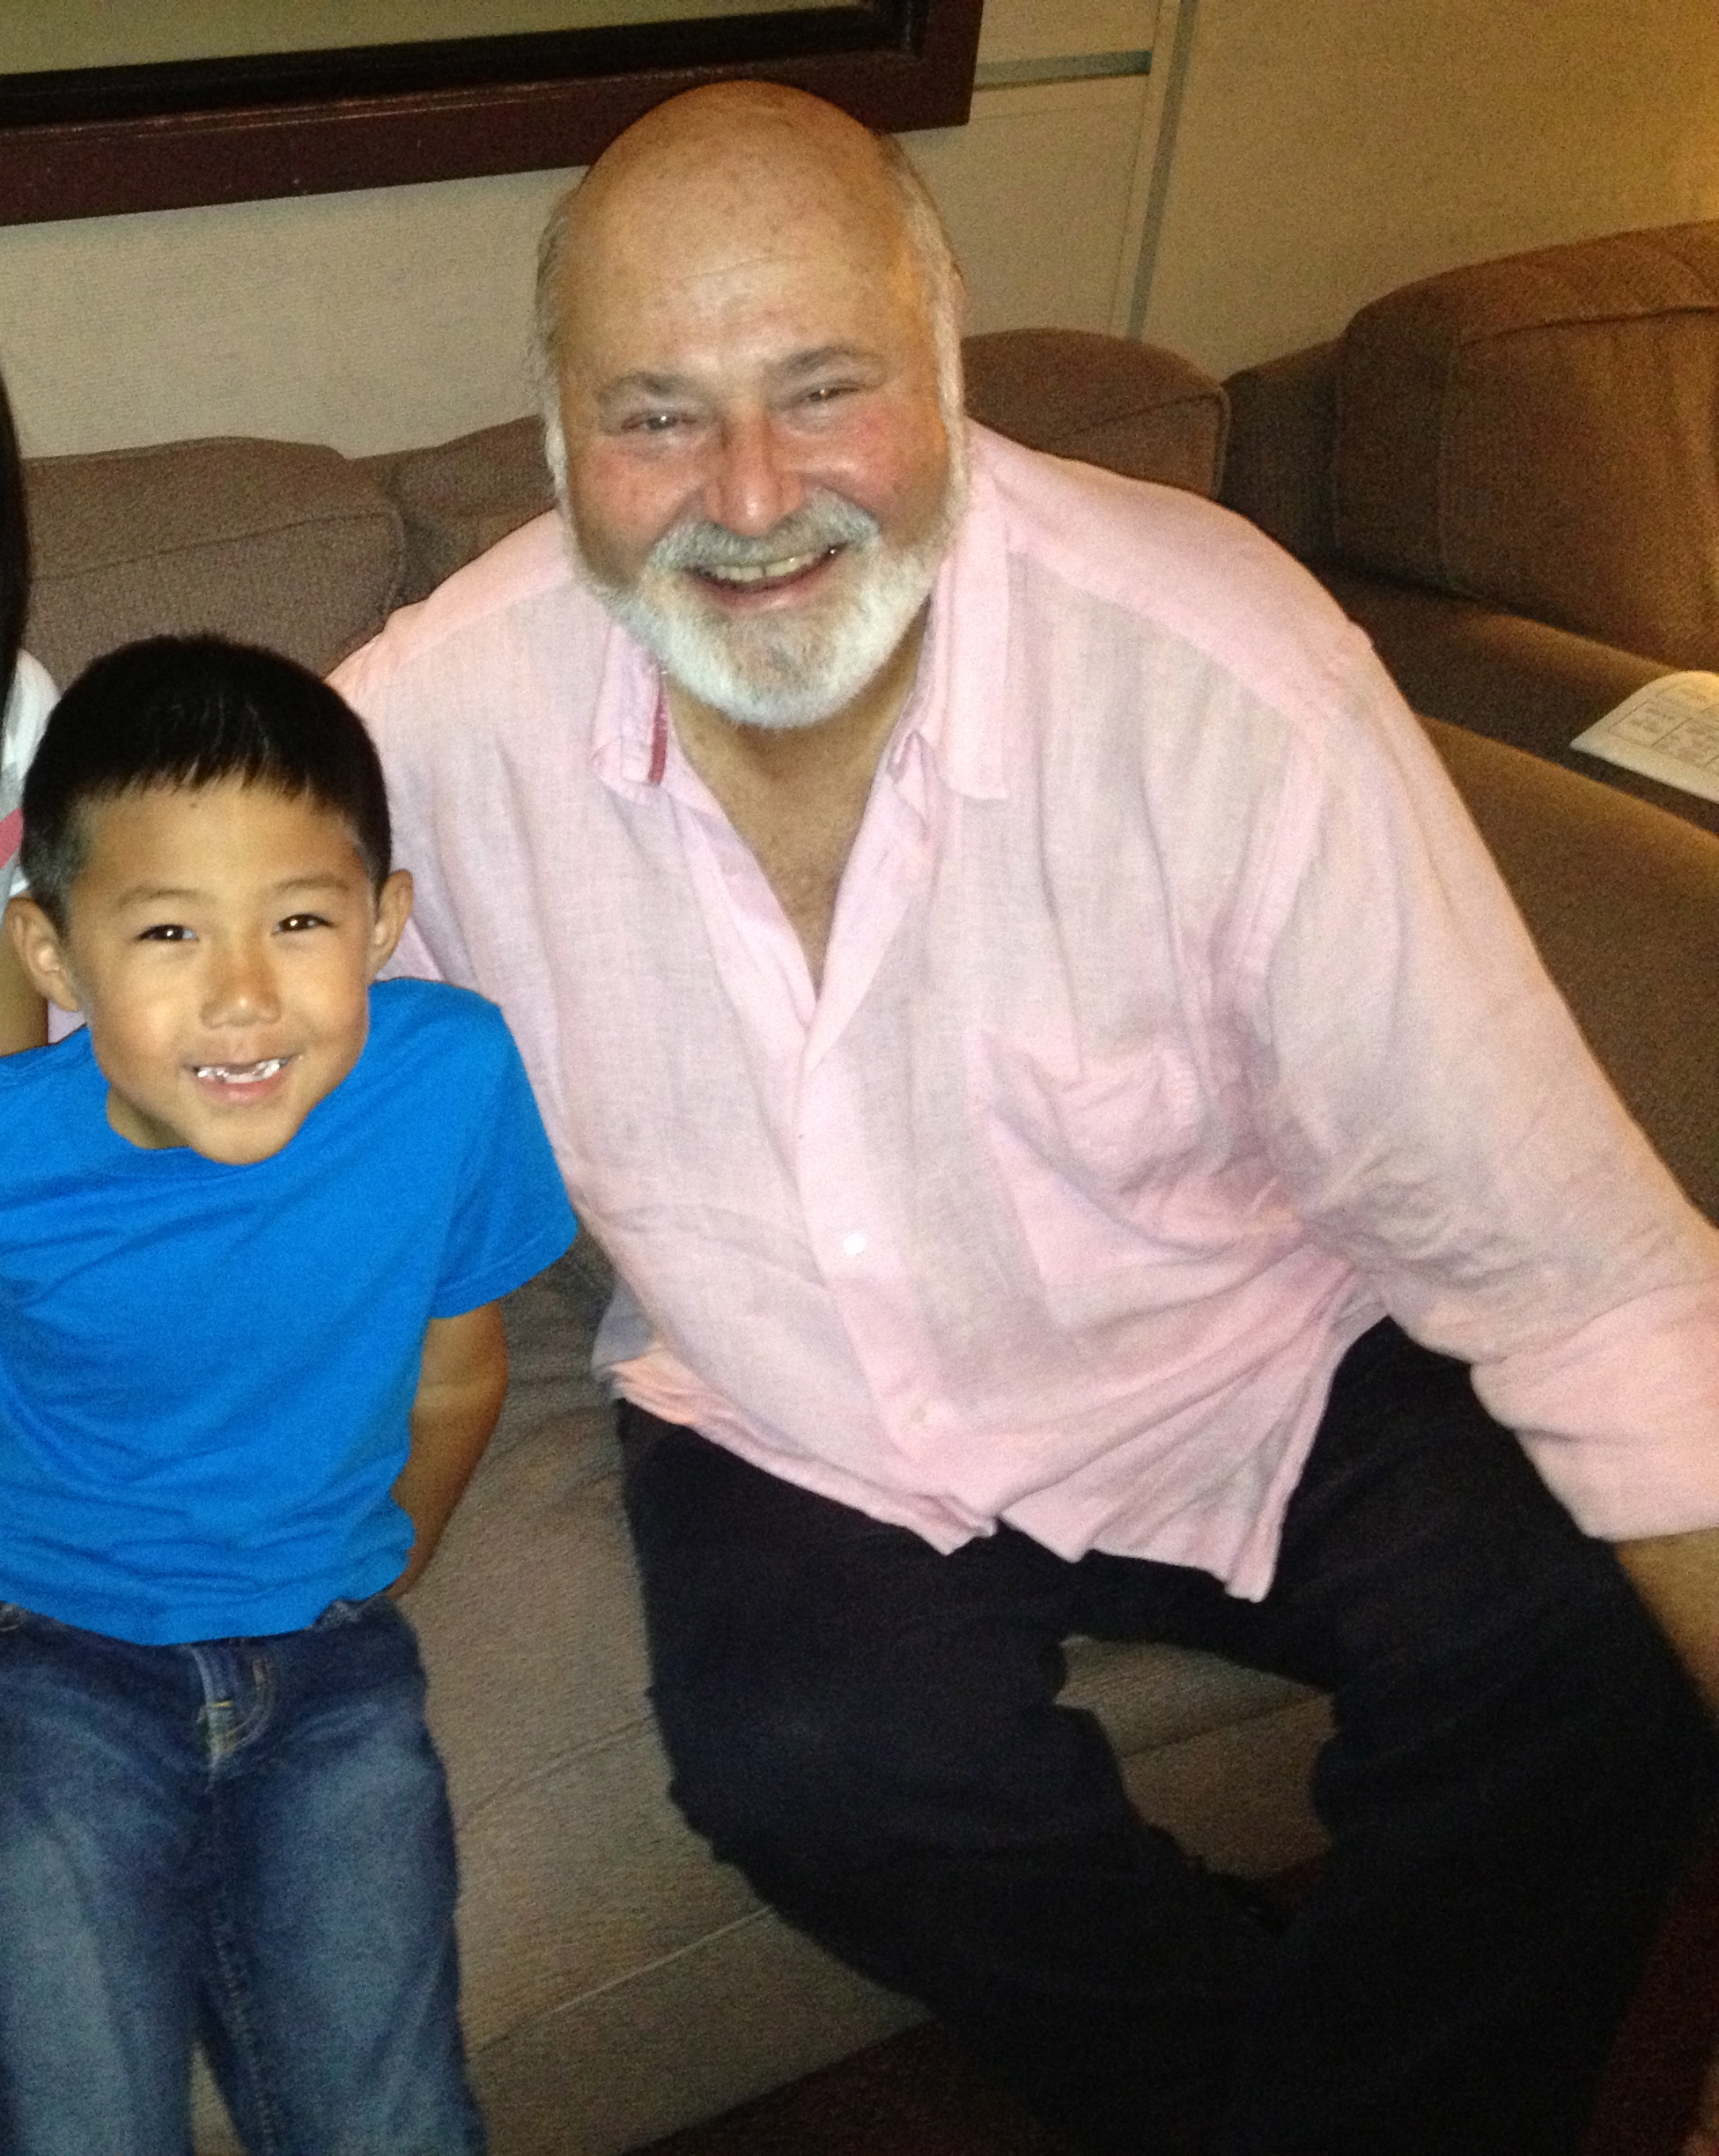 With Director Rob Reiner for work in film, 